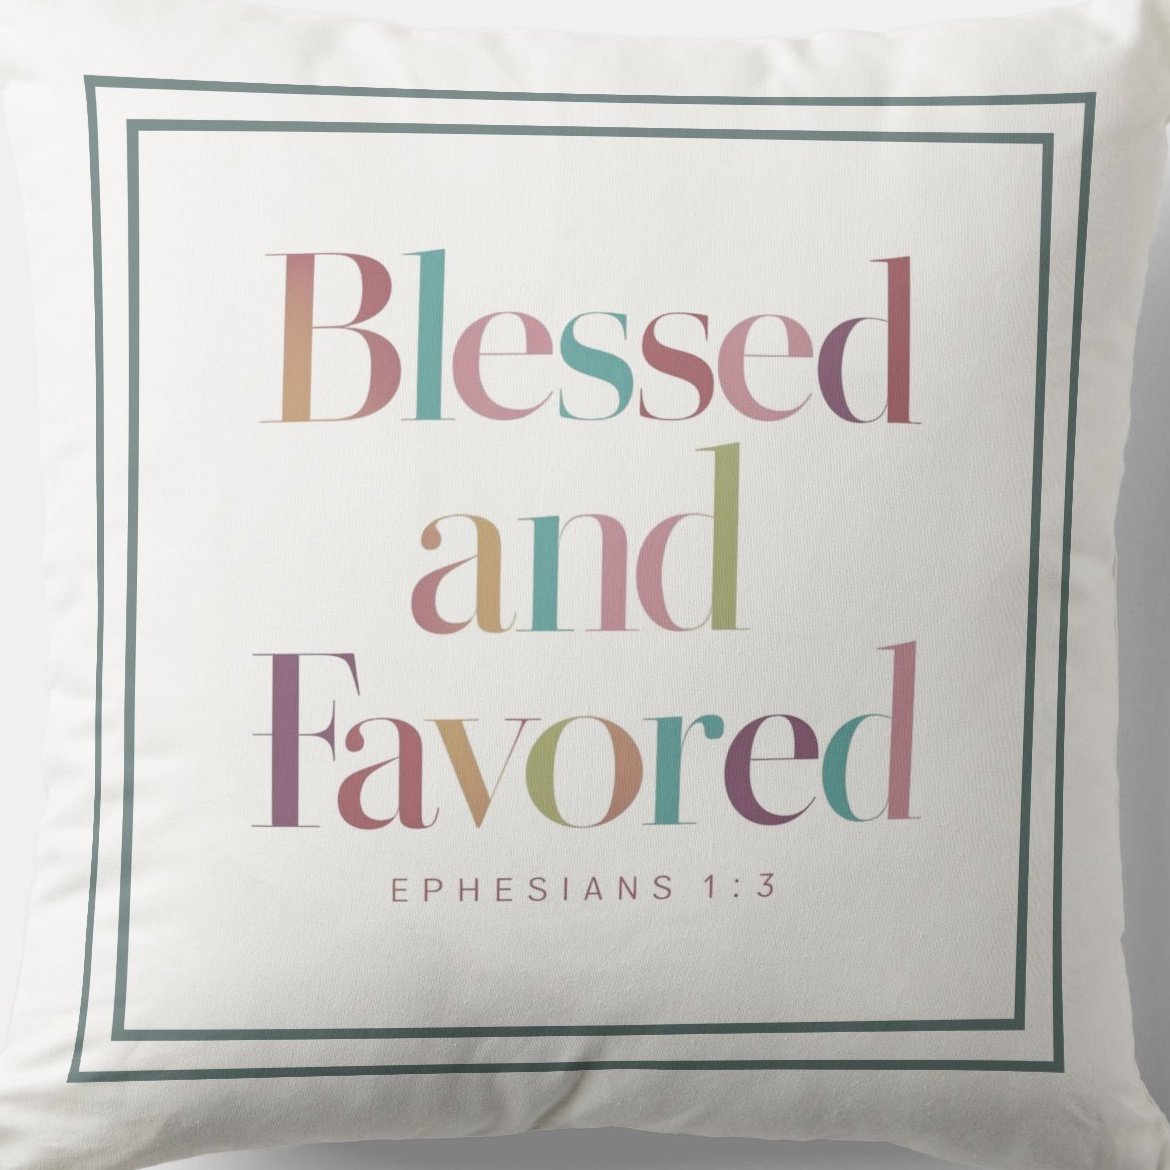 Blessed And Favored #Cushion zazzle.com/blessed_and_fa… Bible Message Throw #Pillow #Blessing #JesusChrist #JesusSaves #Jesus #christian #spiritual #Homedecoration #uniquegift #giftideas #MothersDayGifts #giftformom #giftidea #HolySpirit #pillows #giftshop #giftsforher #giftsformom